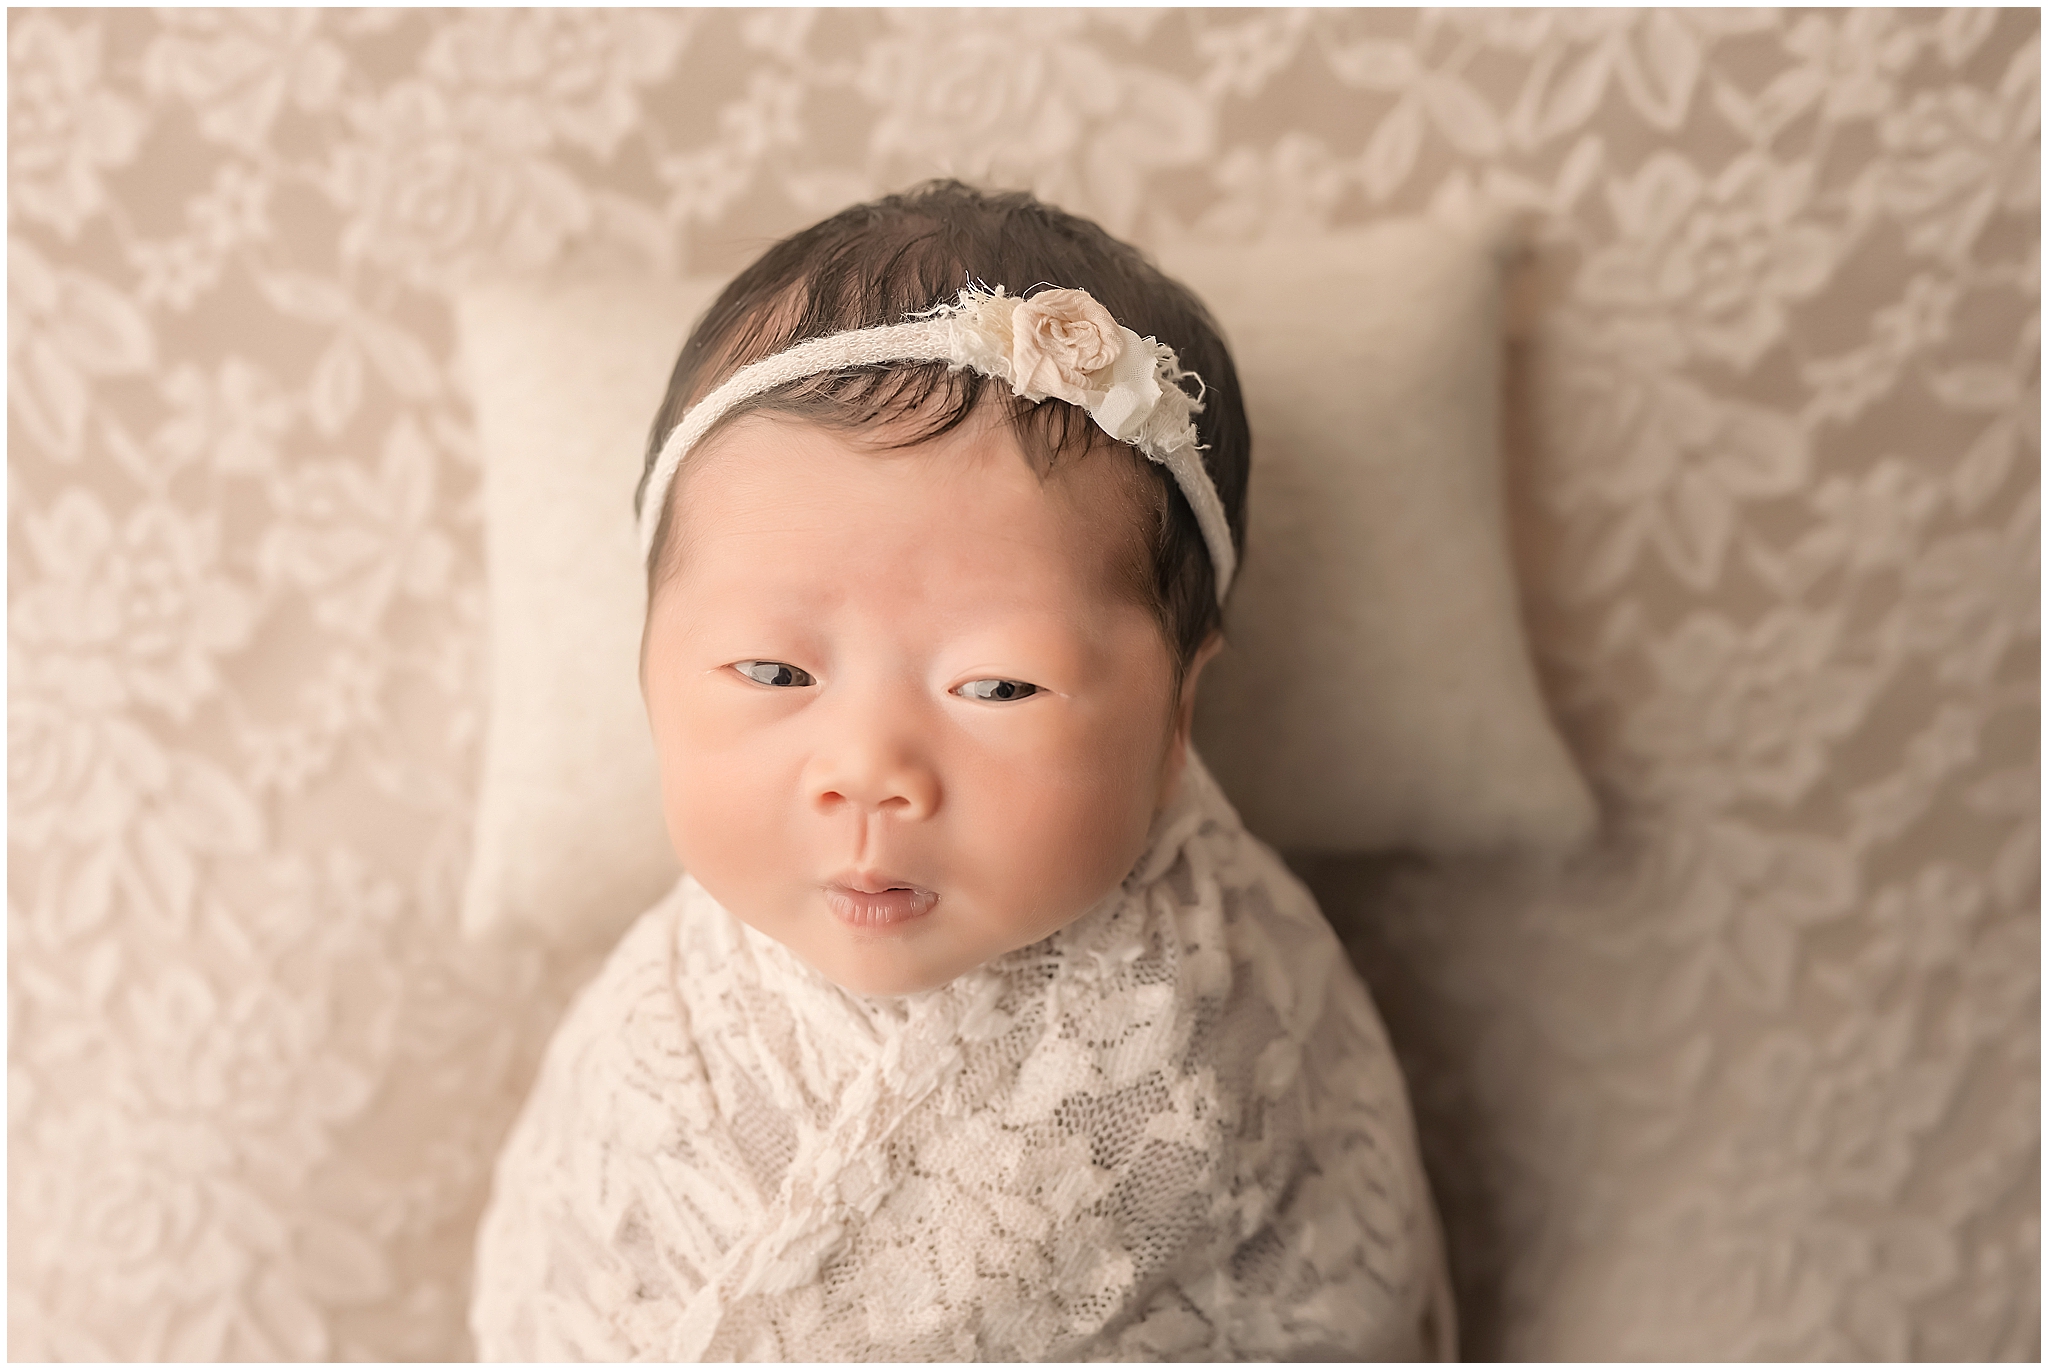 newborn baby with eyes open looking at the camera during newborn session in london ontario